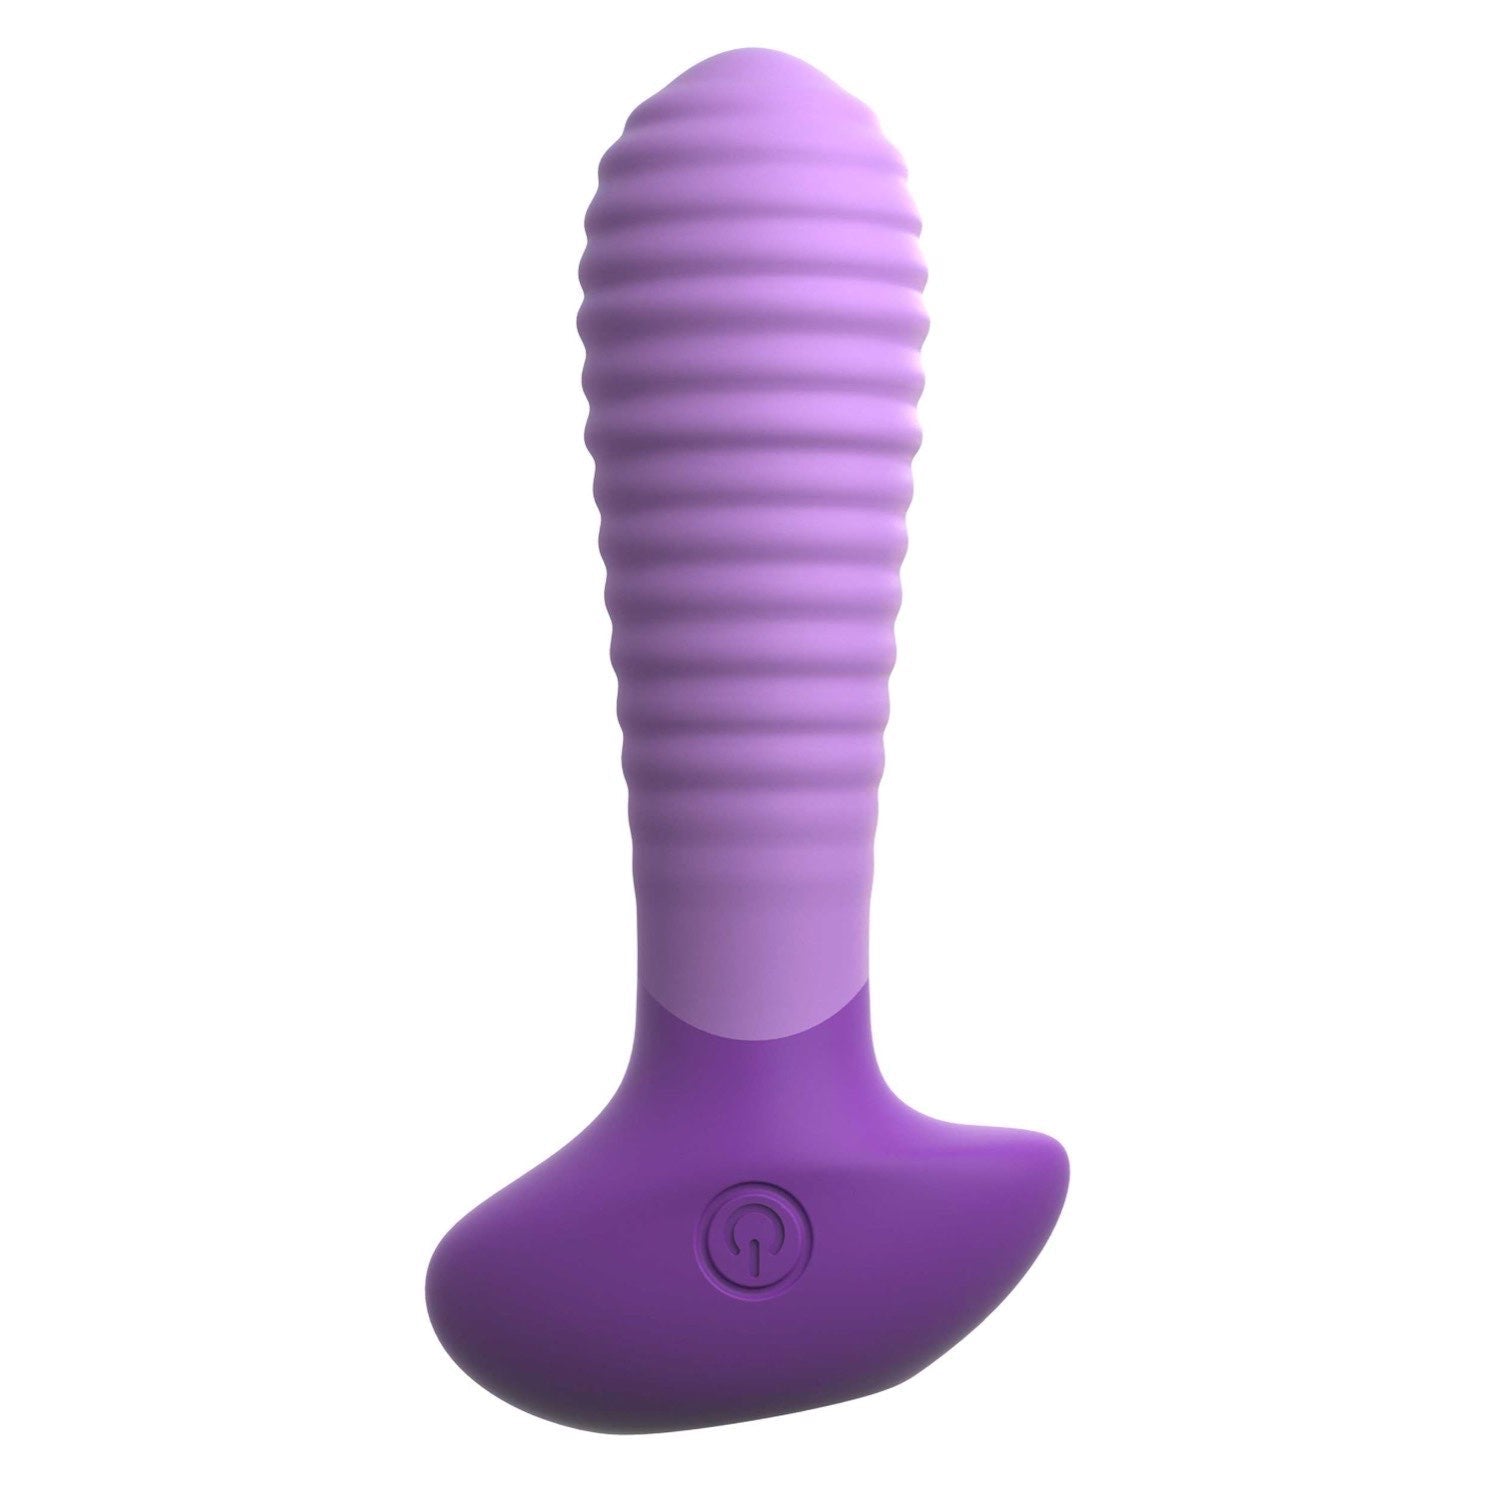 Fantasy For Her Petite Tease-Her - Purple 11.9 cm (4.75&quot;) USB Rechargeable Stimulator by Pipedream